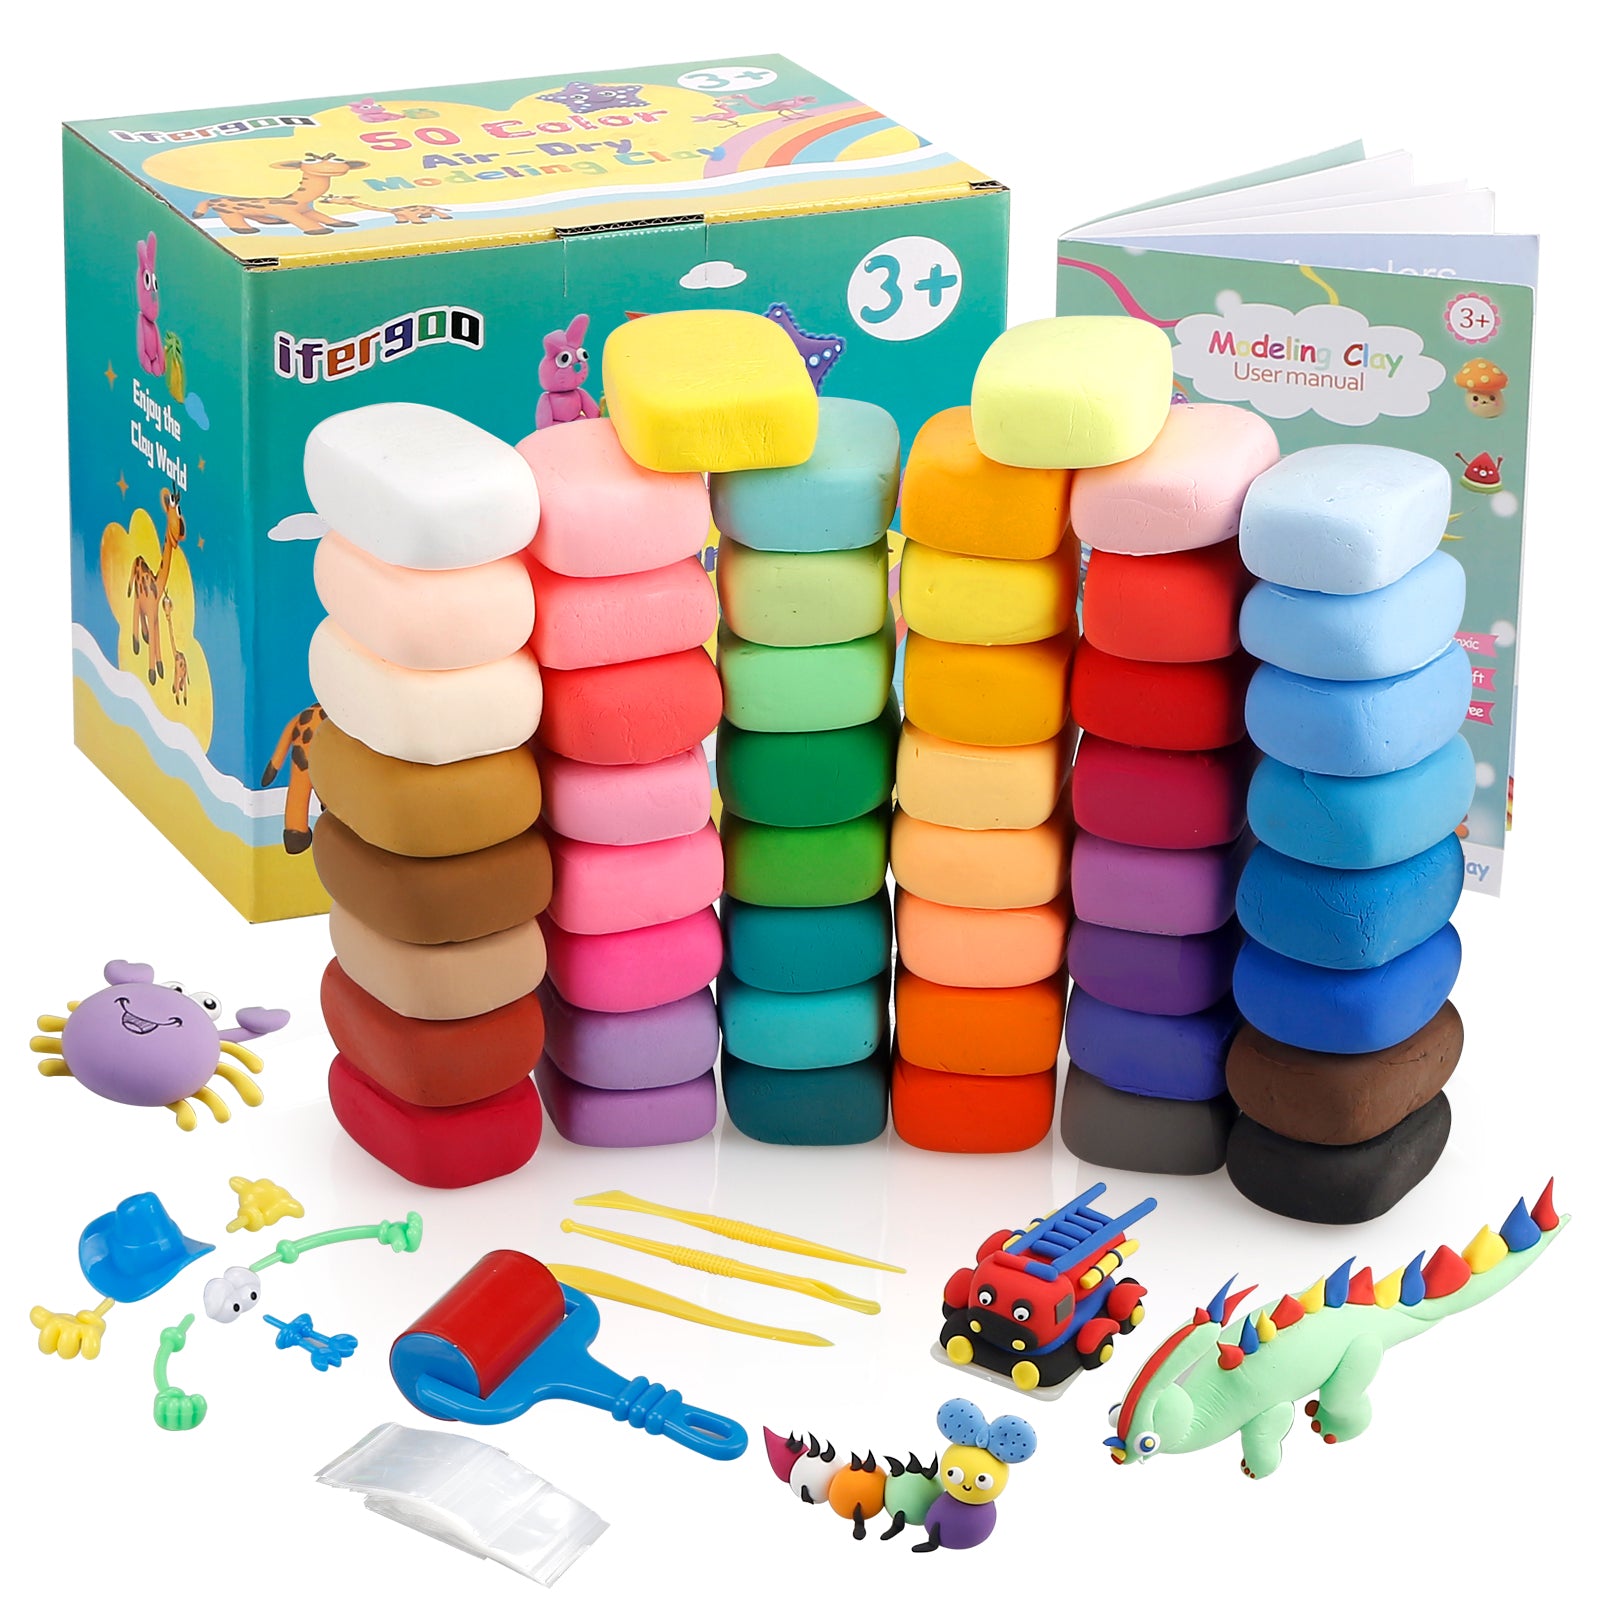 Model Clay Set - 24 Color Air Dried Ultra Light Clay, Safe And Non-toxic,  Perfect Gift